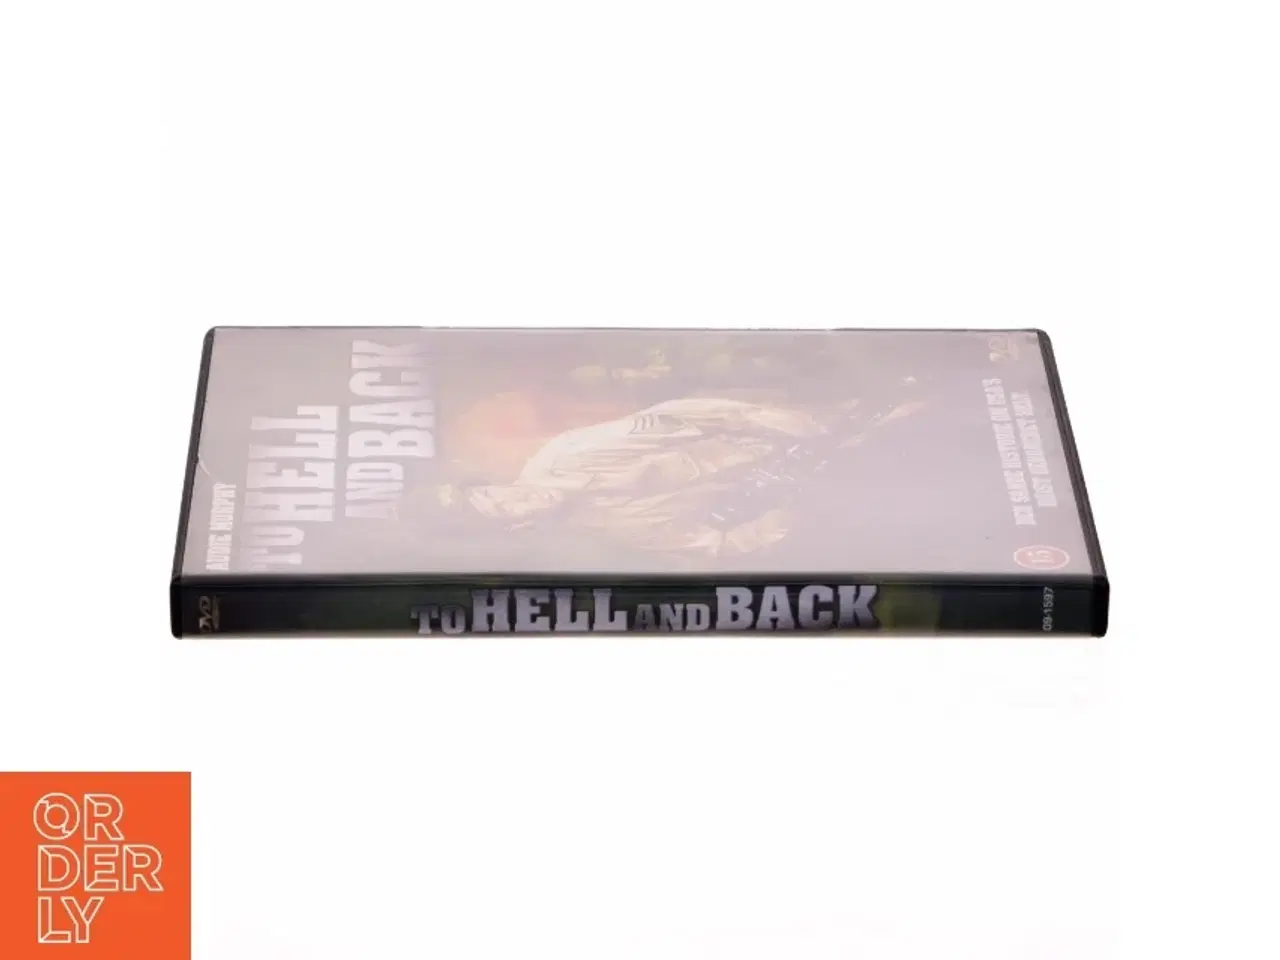 Billede 2 - DVD - To Hell and Back